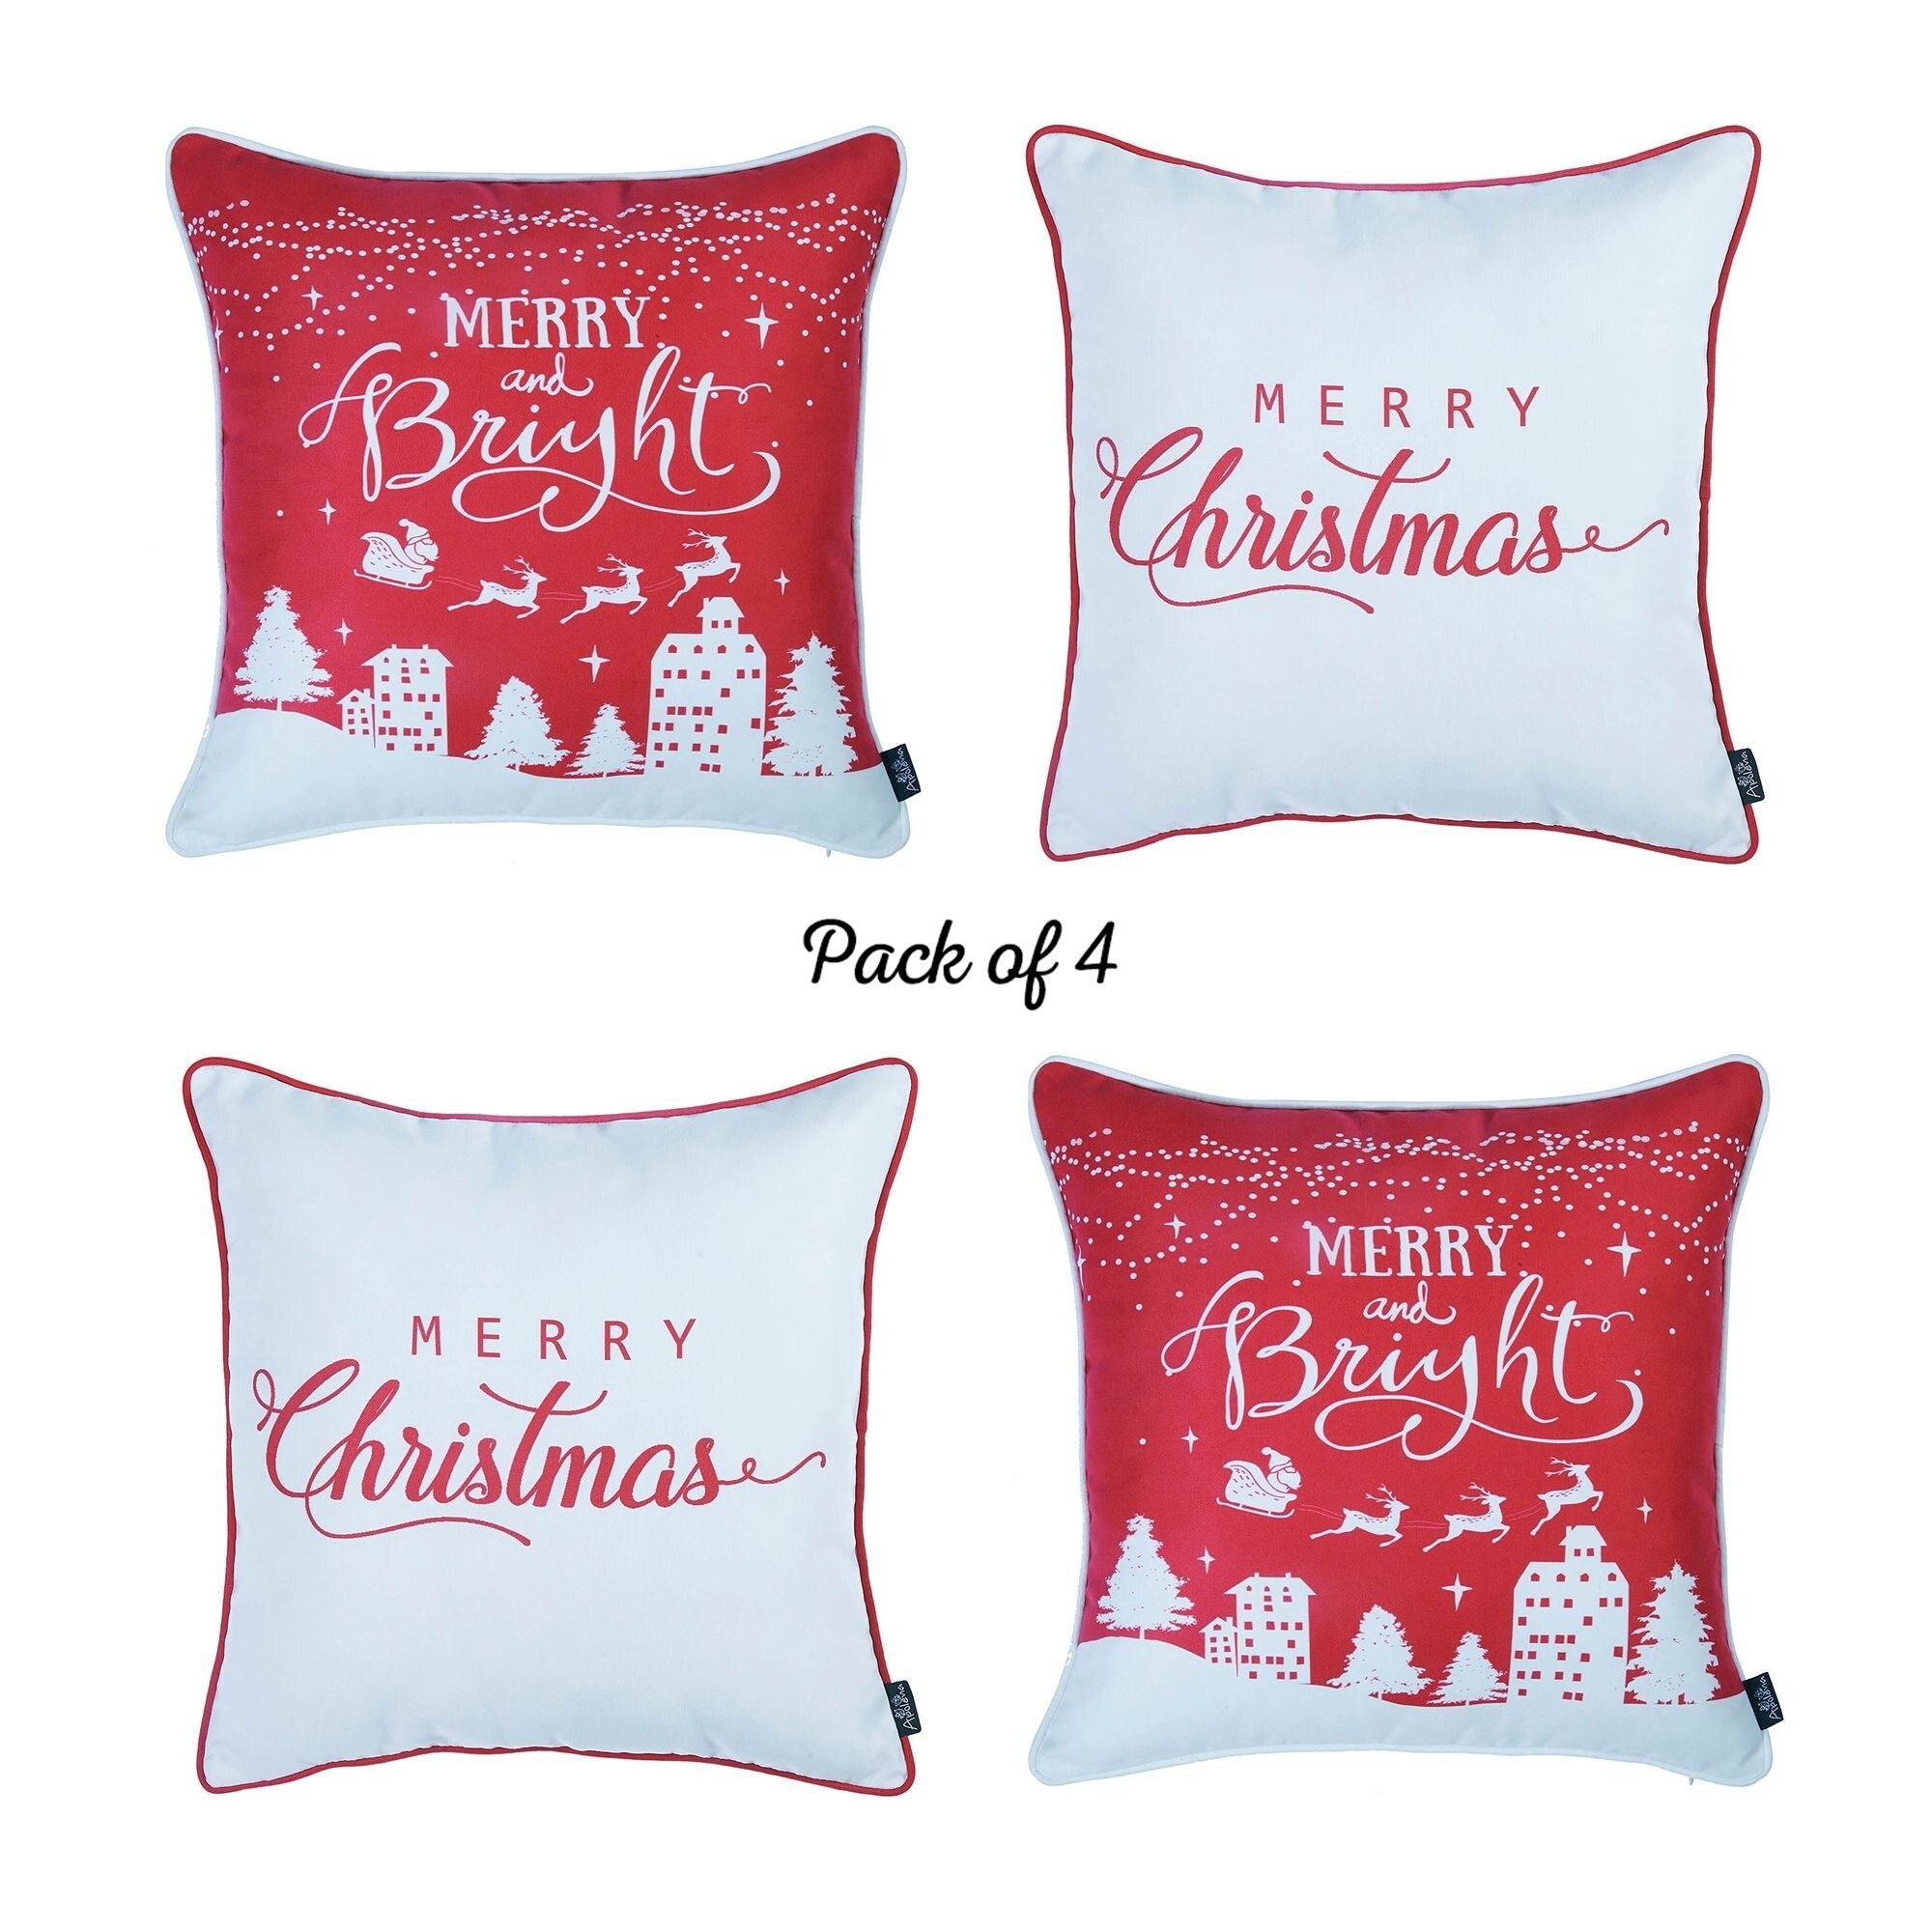 https://ak1.ostkcdn.com/images/products/is/images/direct/86fc95c2bc0c1f15b5b90846cf9d9e5195a56c68/Merry-Christmas-Decorative-Throw-Pillow-Square-Set-of-4.jpg